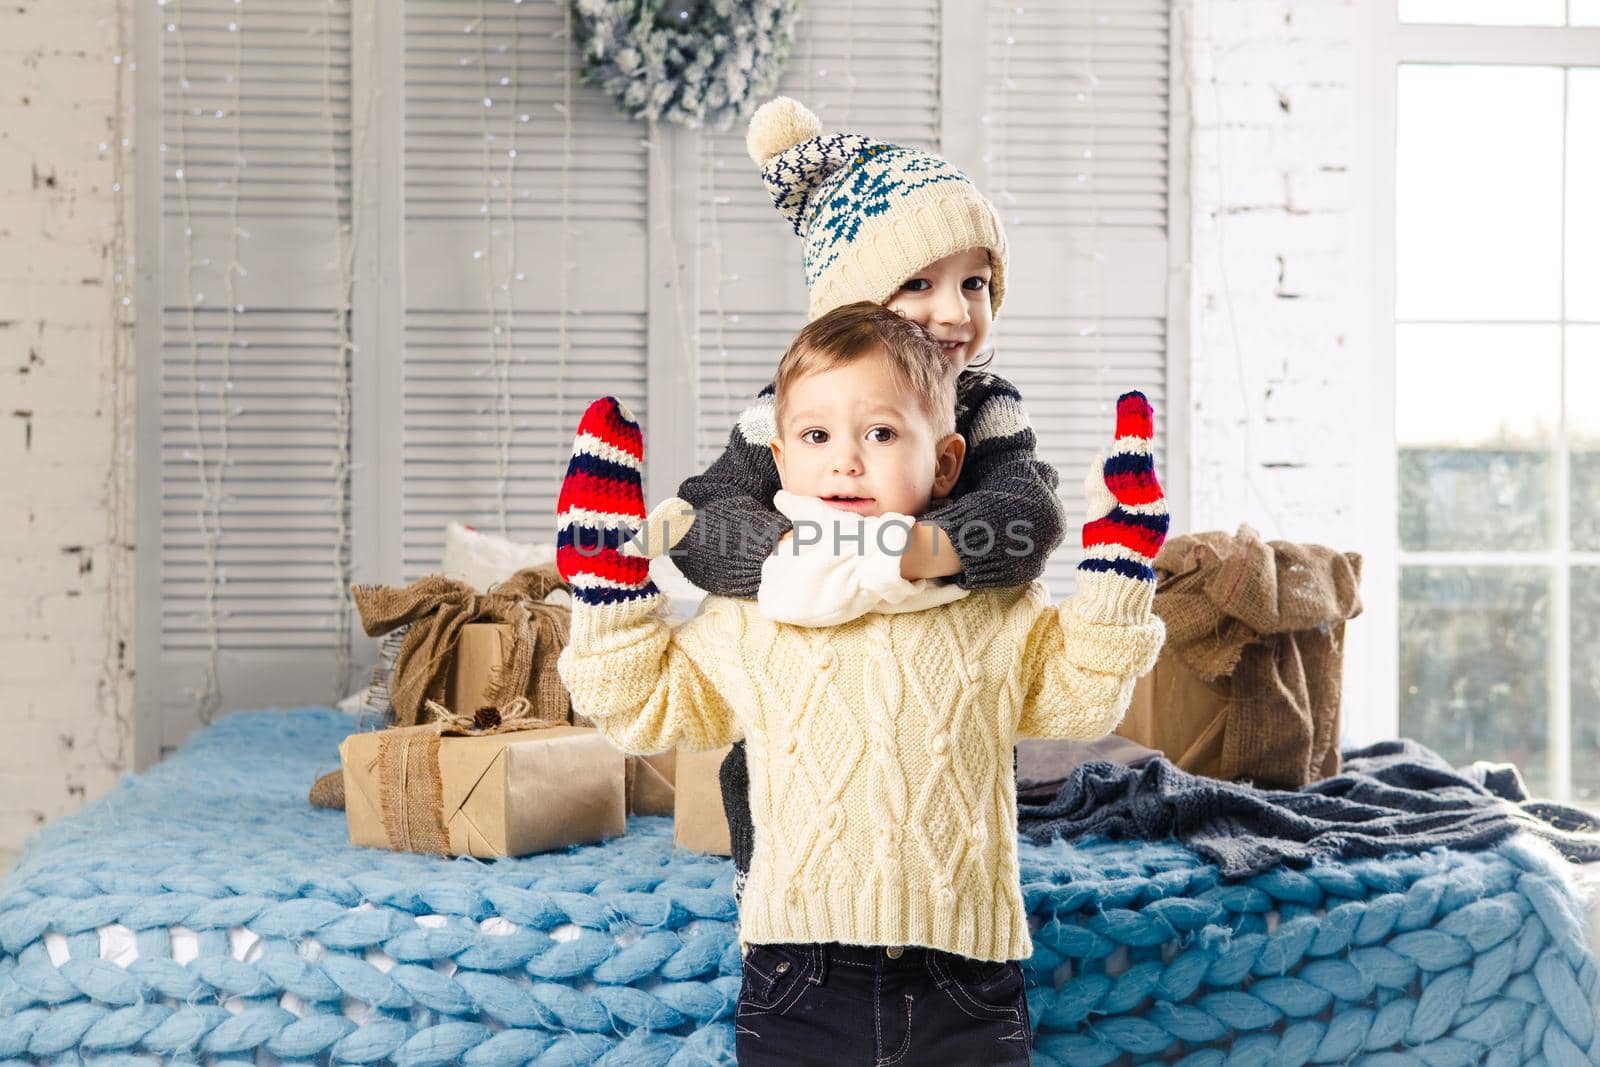 Christmas concept.Children brother and sister in embrace of the house in the bedroom near bed with boxes,gifts on back of the decor and windows on sunny day.Wear a warm woolen garment cap and mittens by Tomashevska